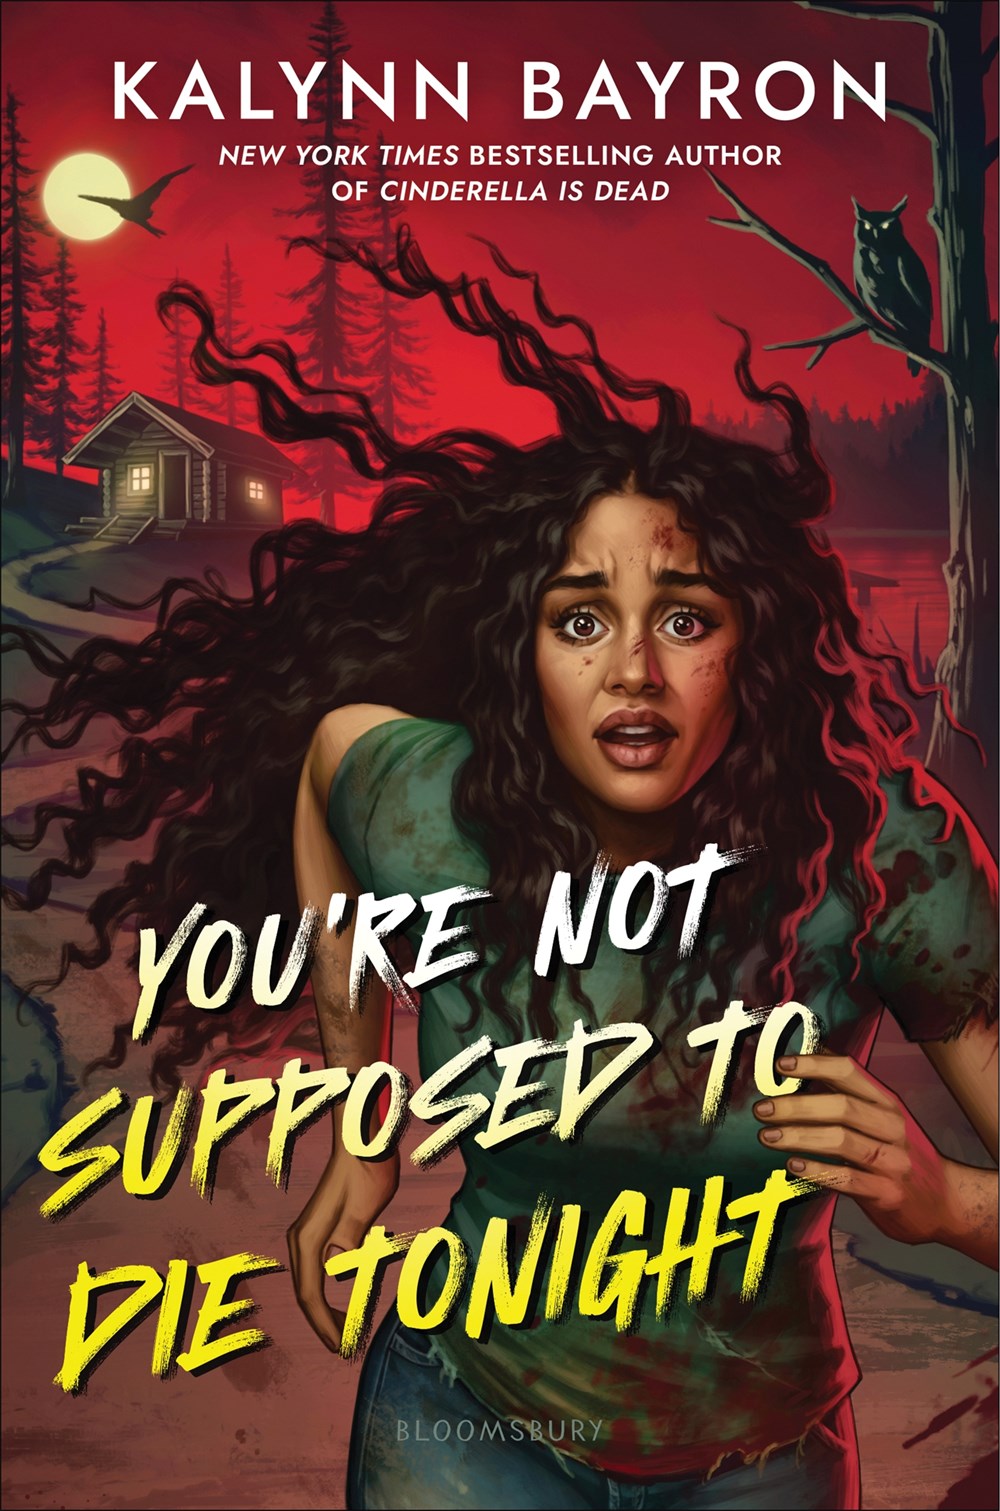 Book Review: You’re Not Supposed to Die Tonight by Kalynn Bayron